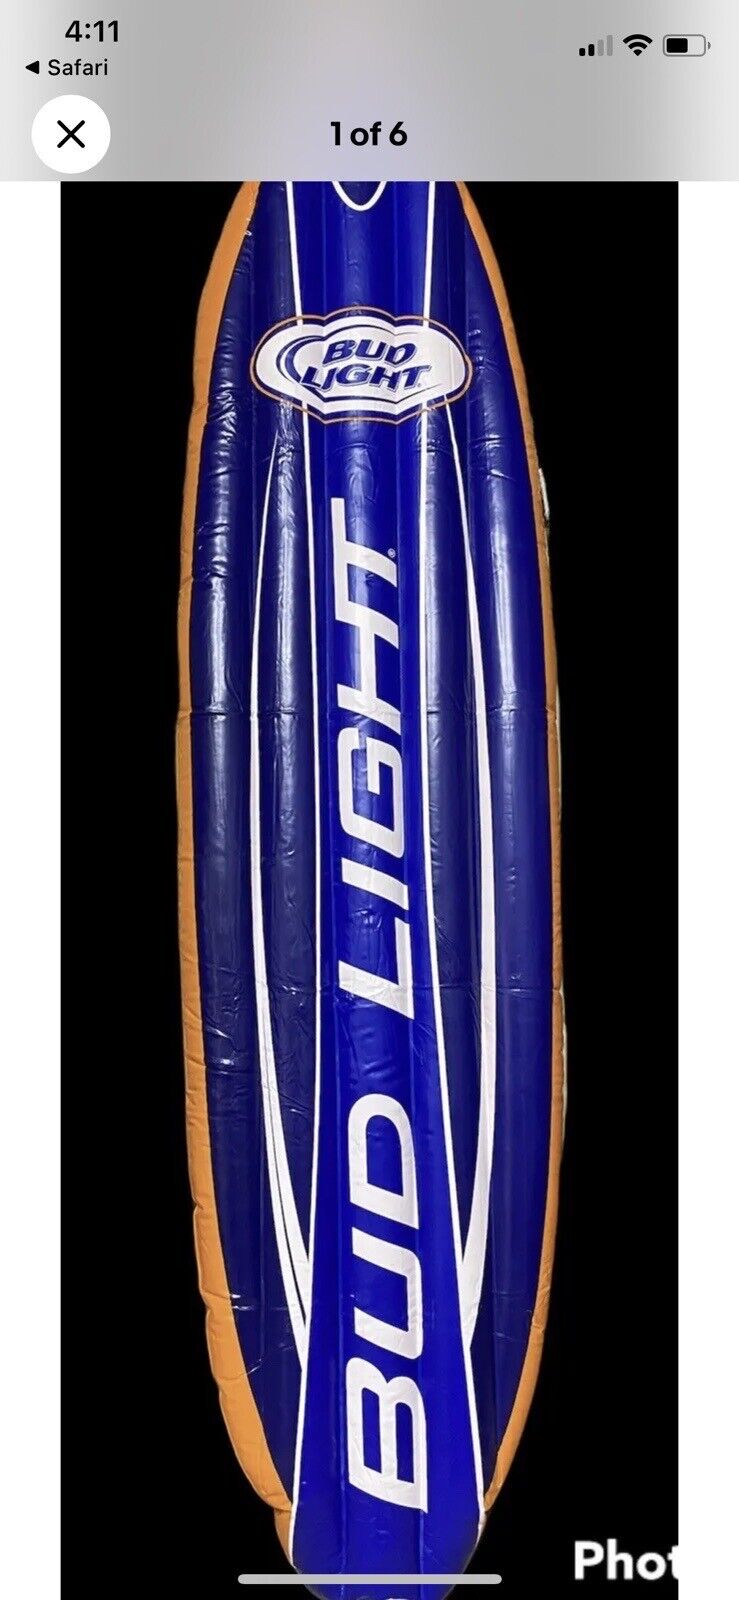 New Bud Light Inflatable Advertising ￼Surf board